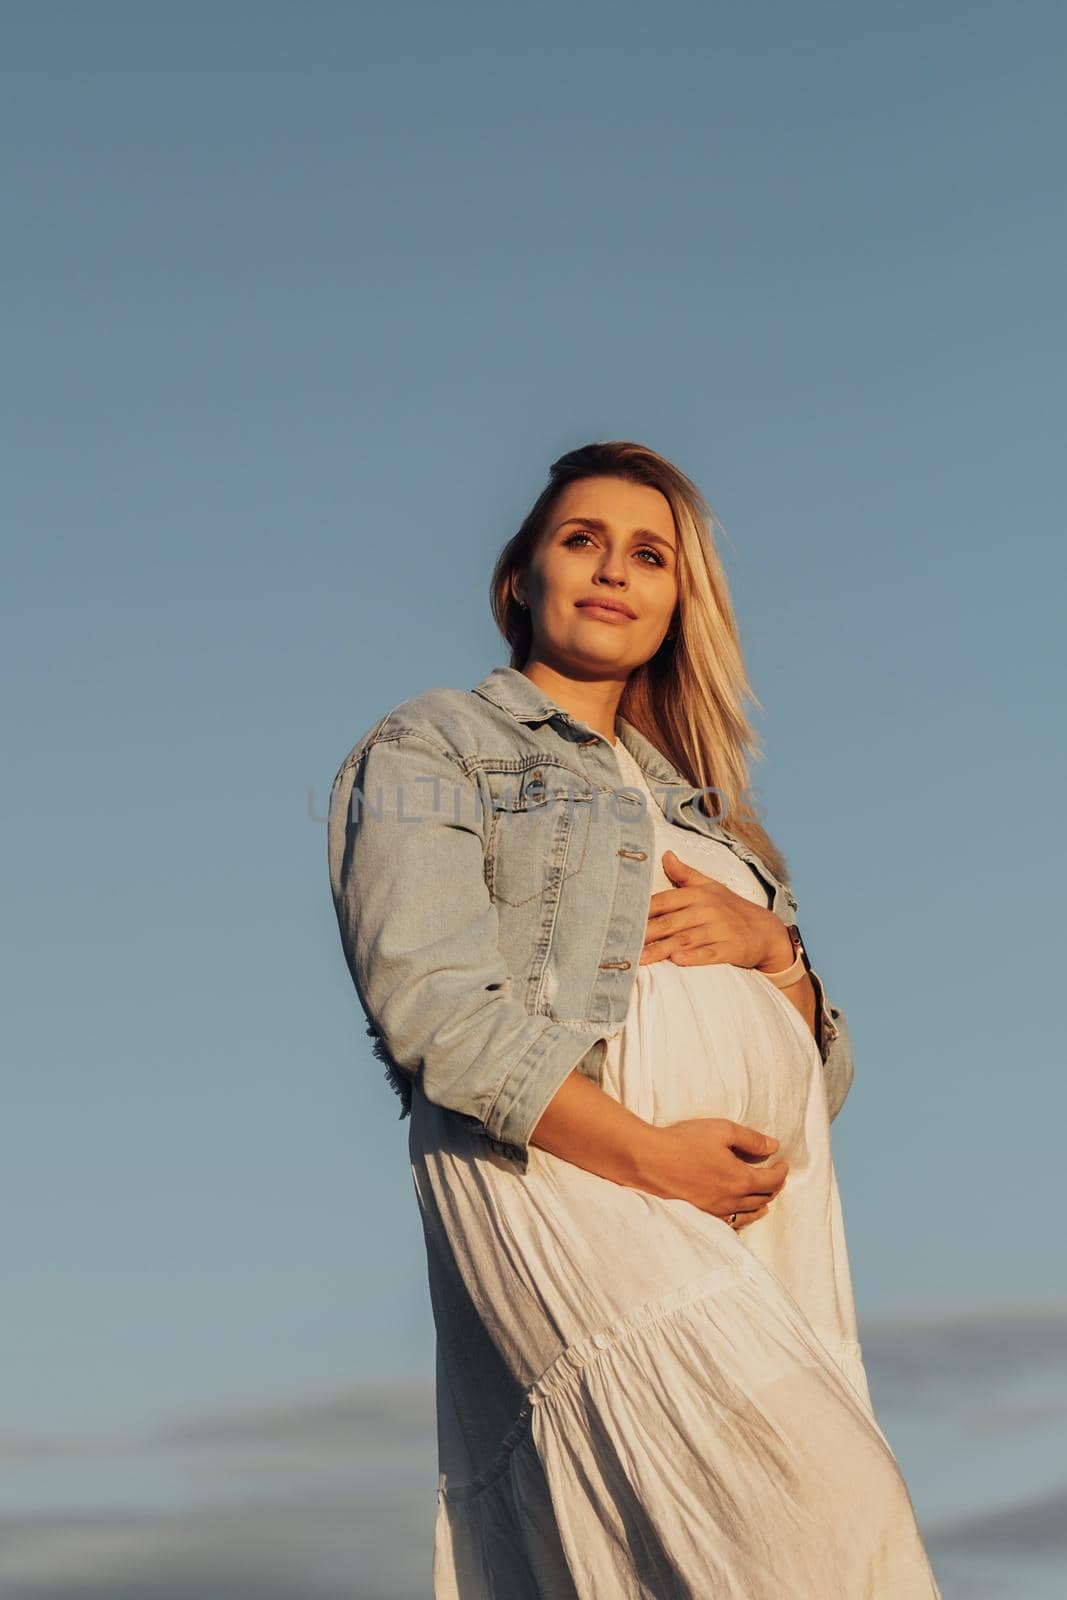 Portrait of Pregnant Young Caucasian Woman Holding Her Belly on Background of Blue Sky